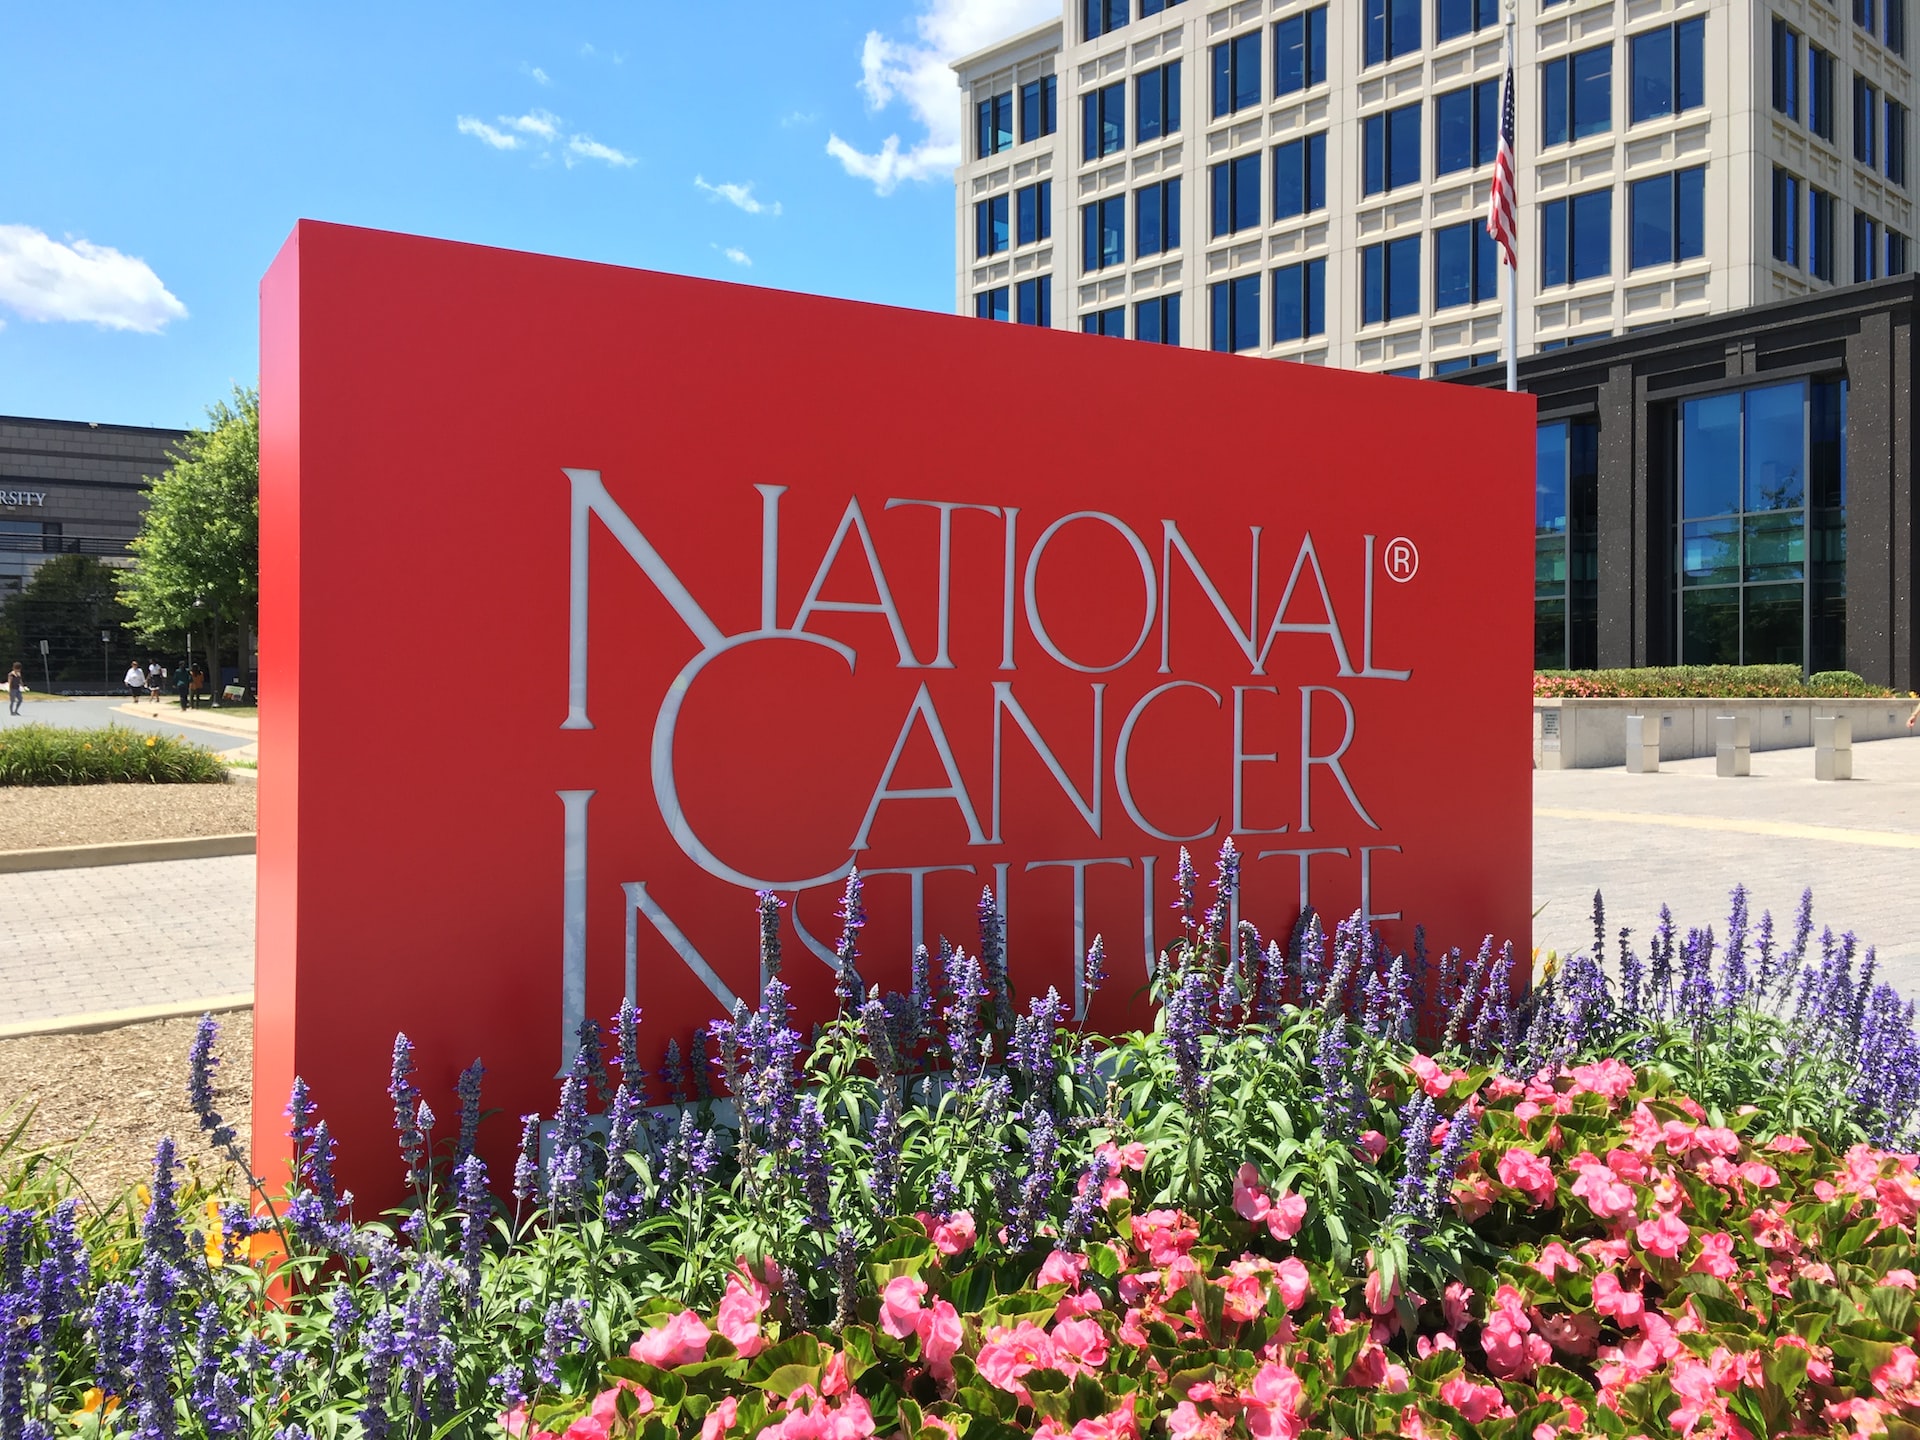 The National Cancer Institute at Shady Grove, Maryland, with the name engraved on a stone near a bed of flowers